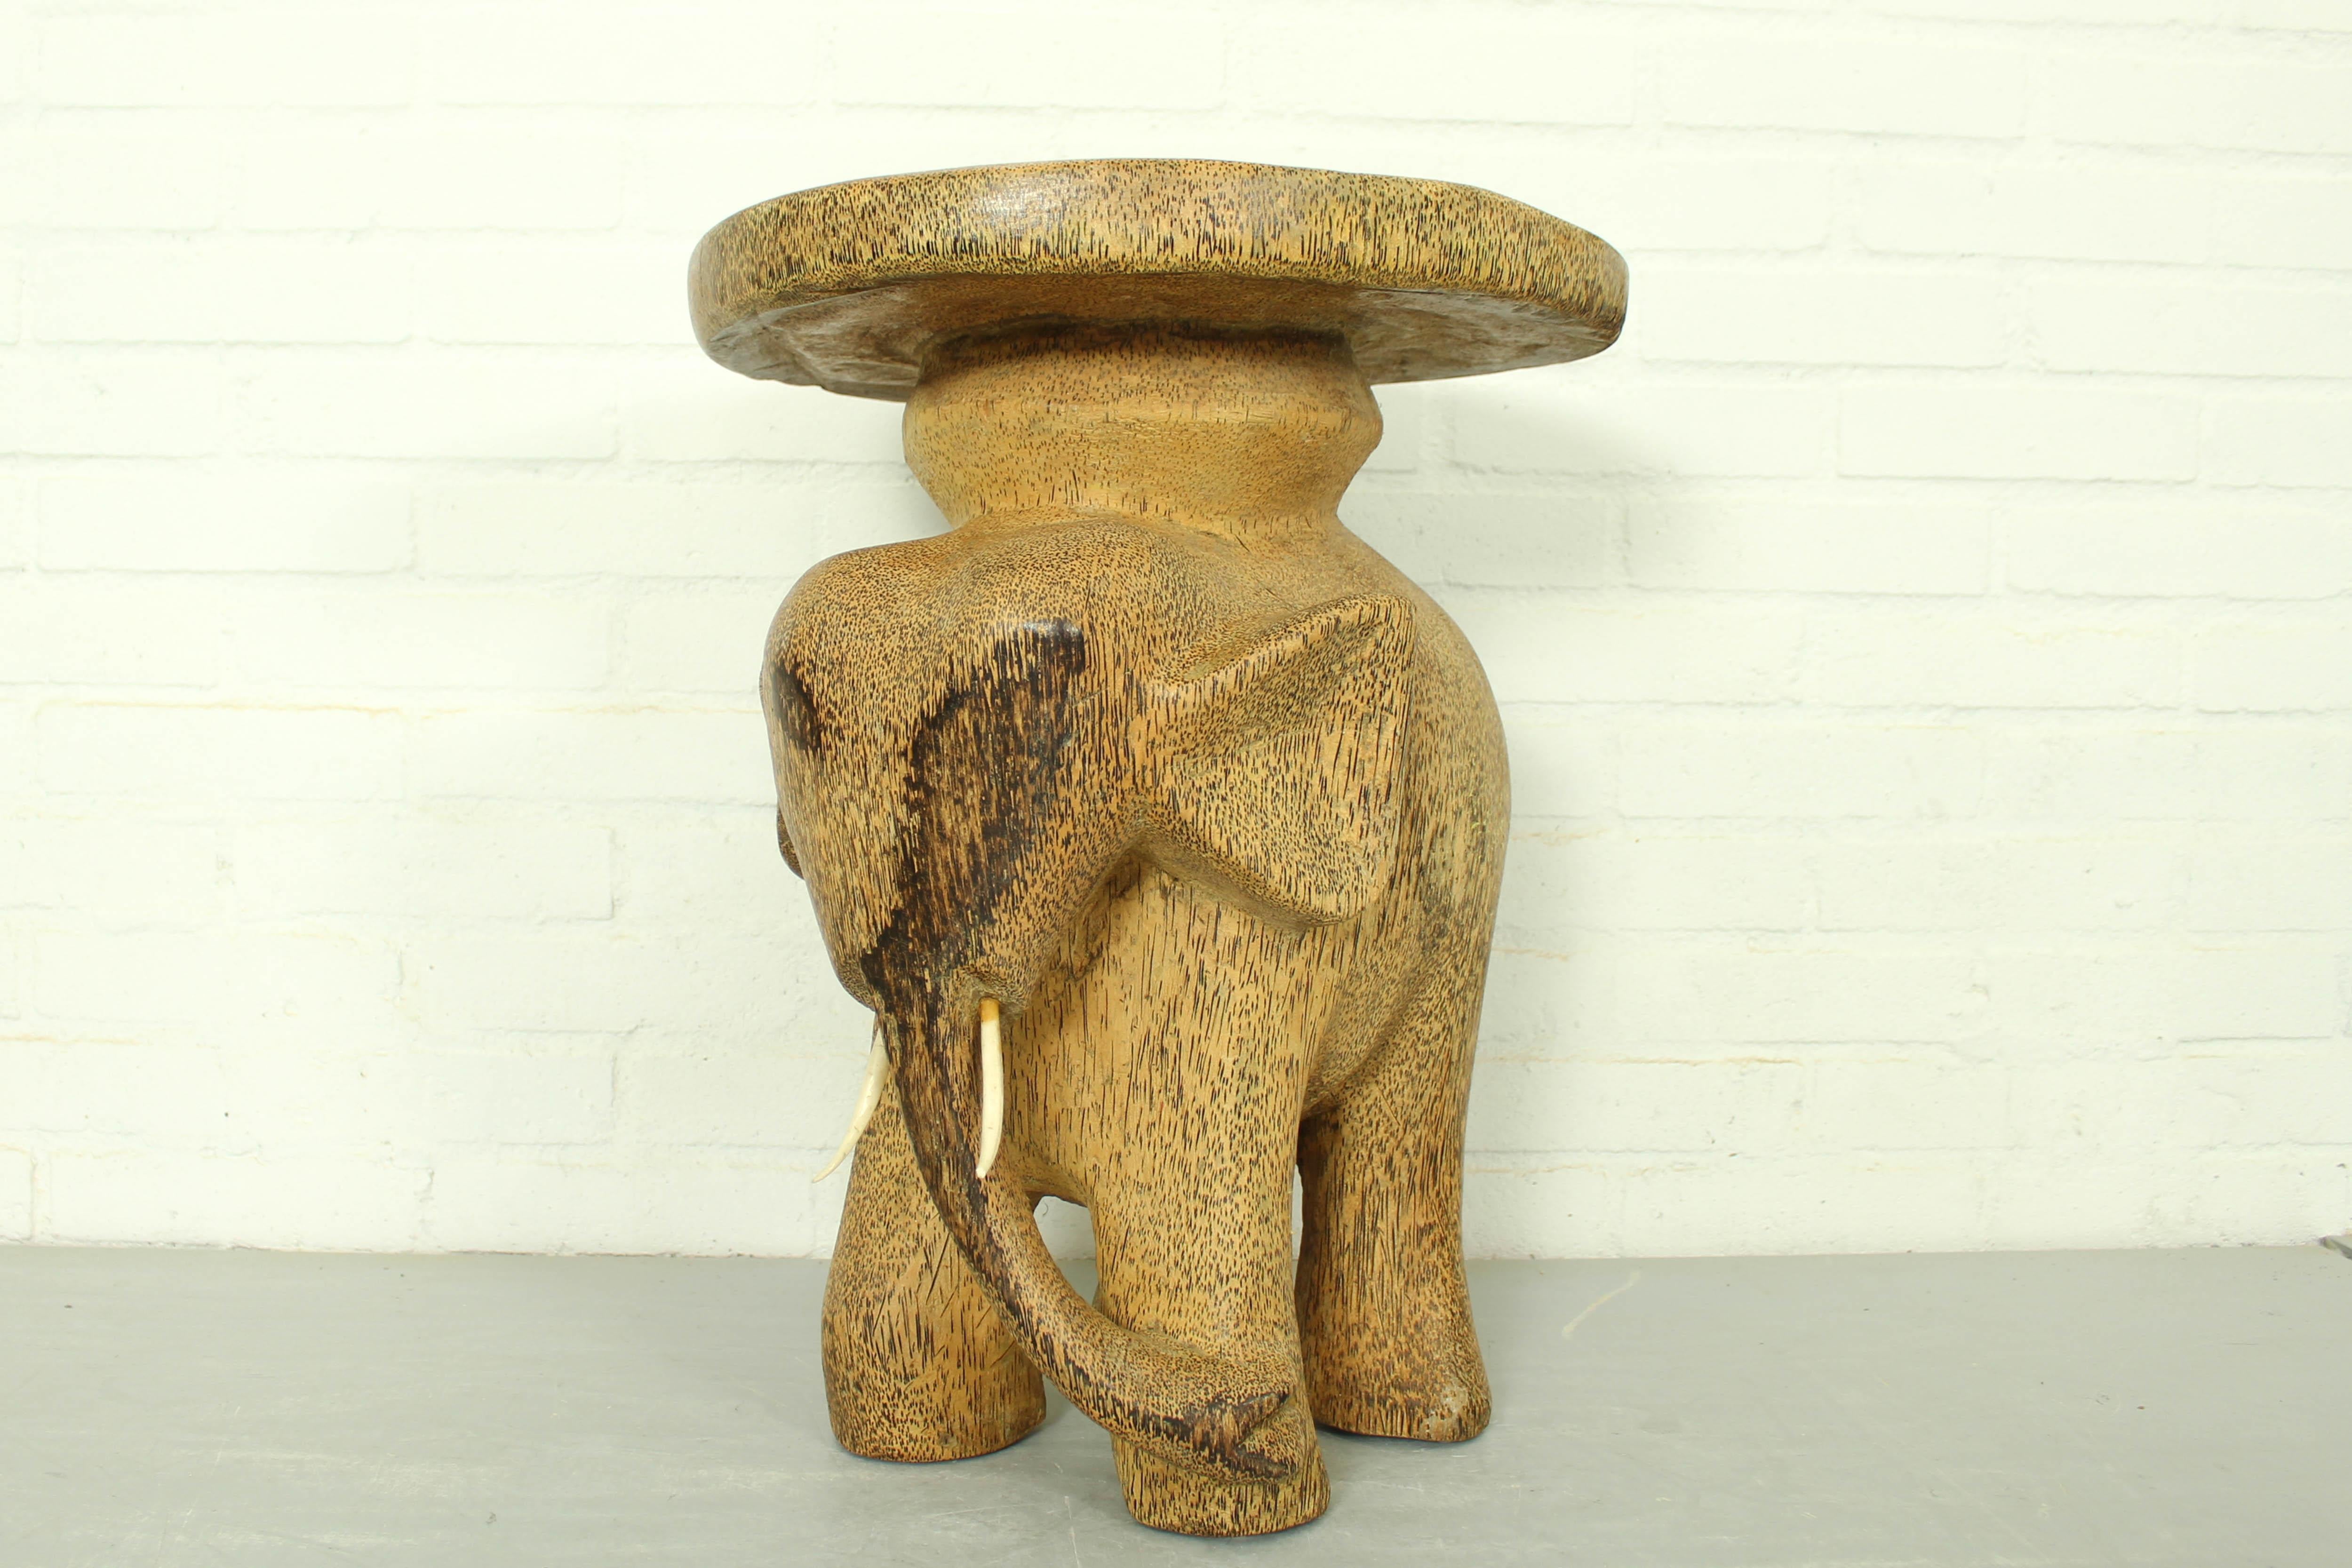 Vintage Elephant Sidetable Stool Plant Stand in Palmwood, 1960s For Sale 5